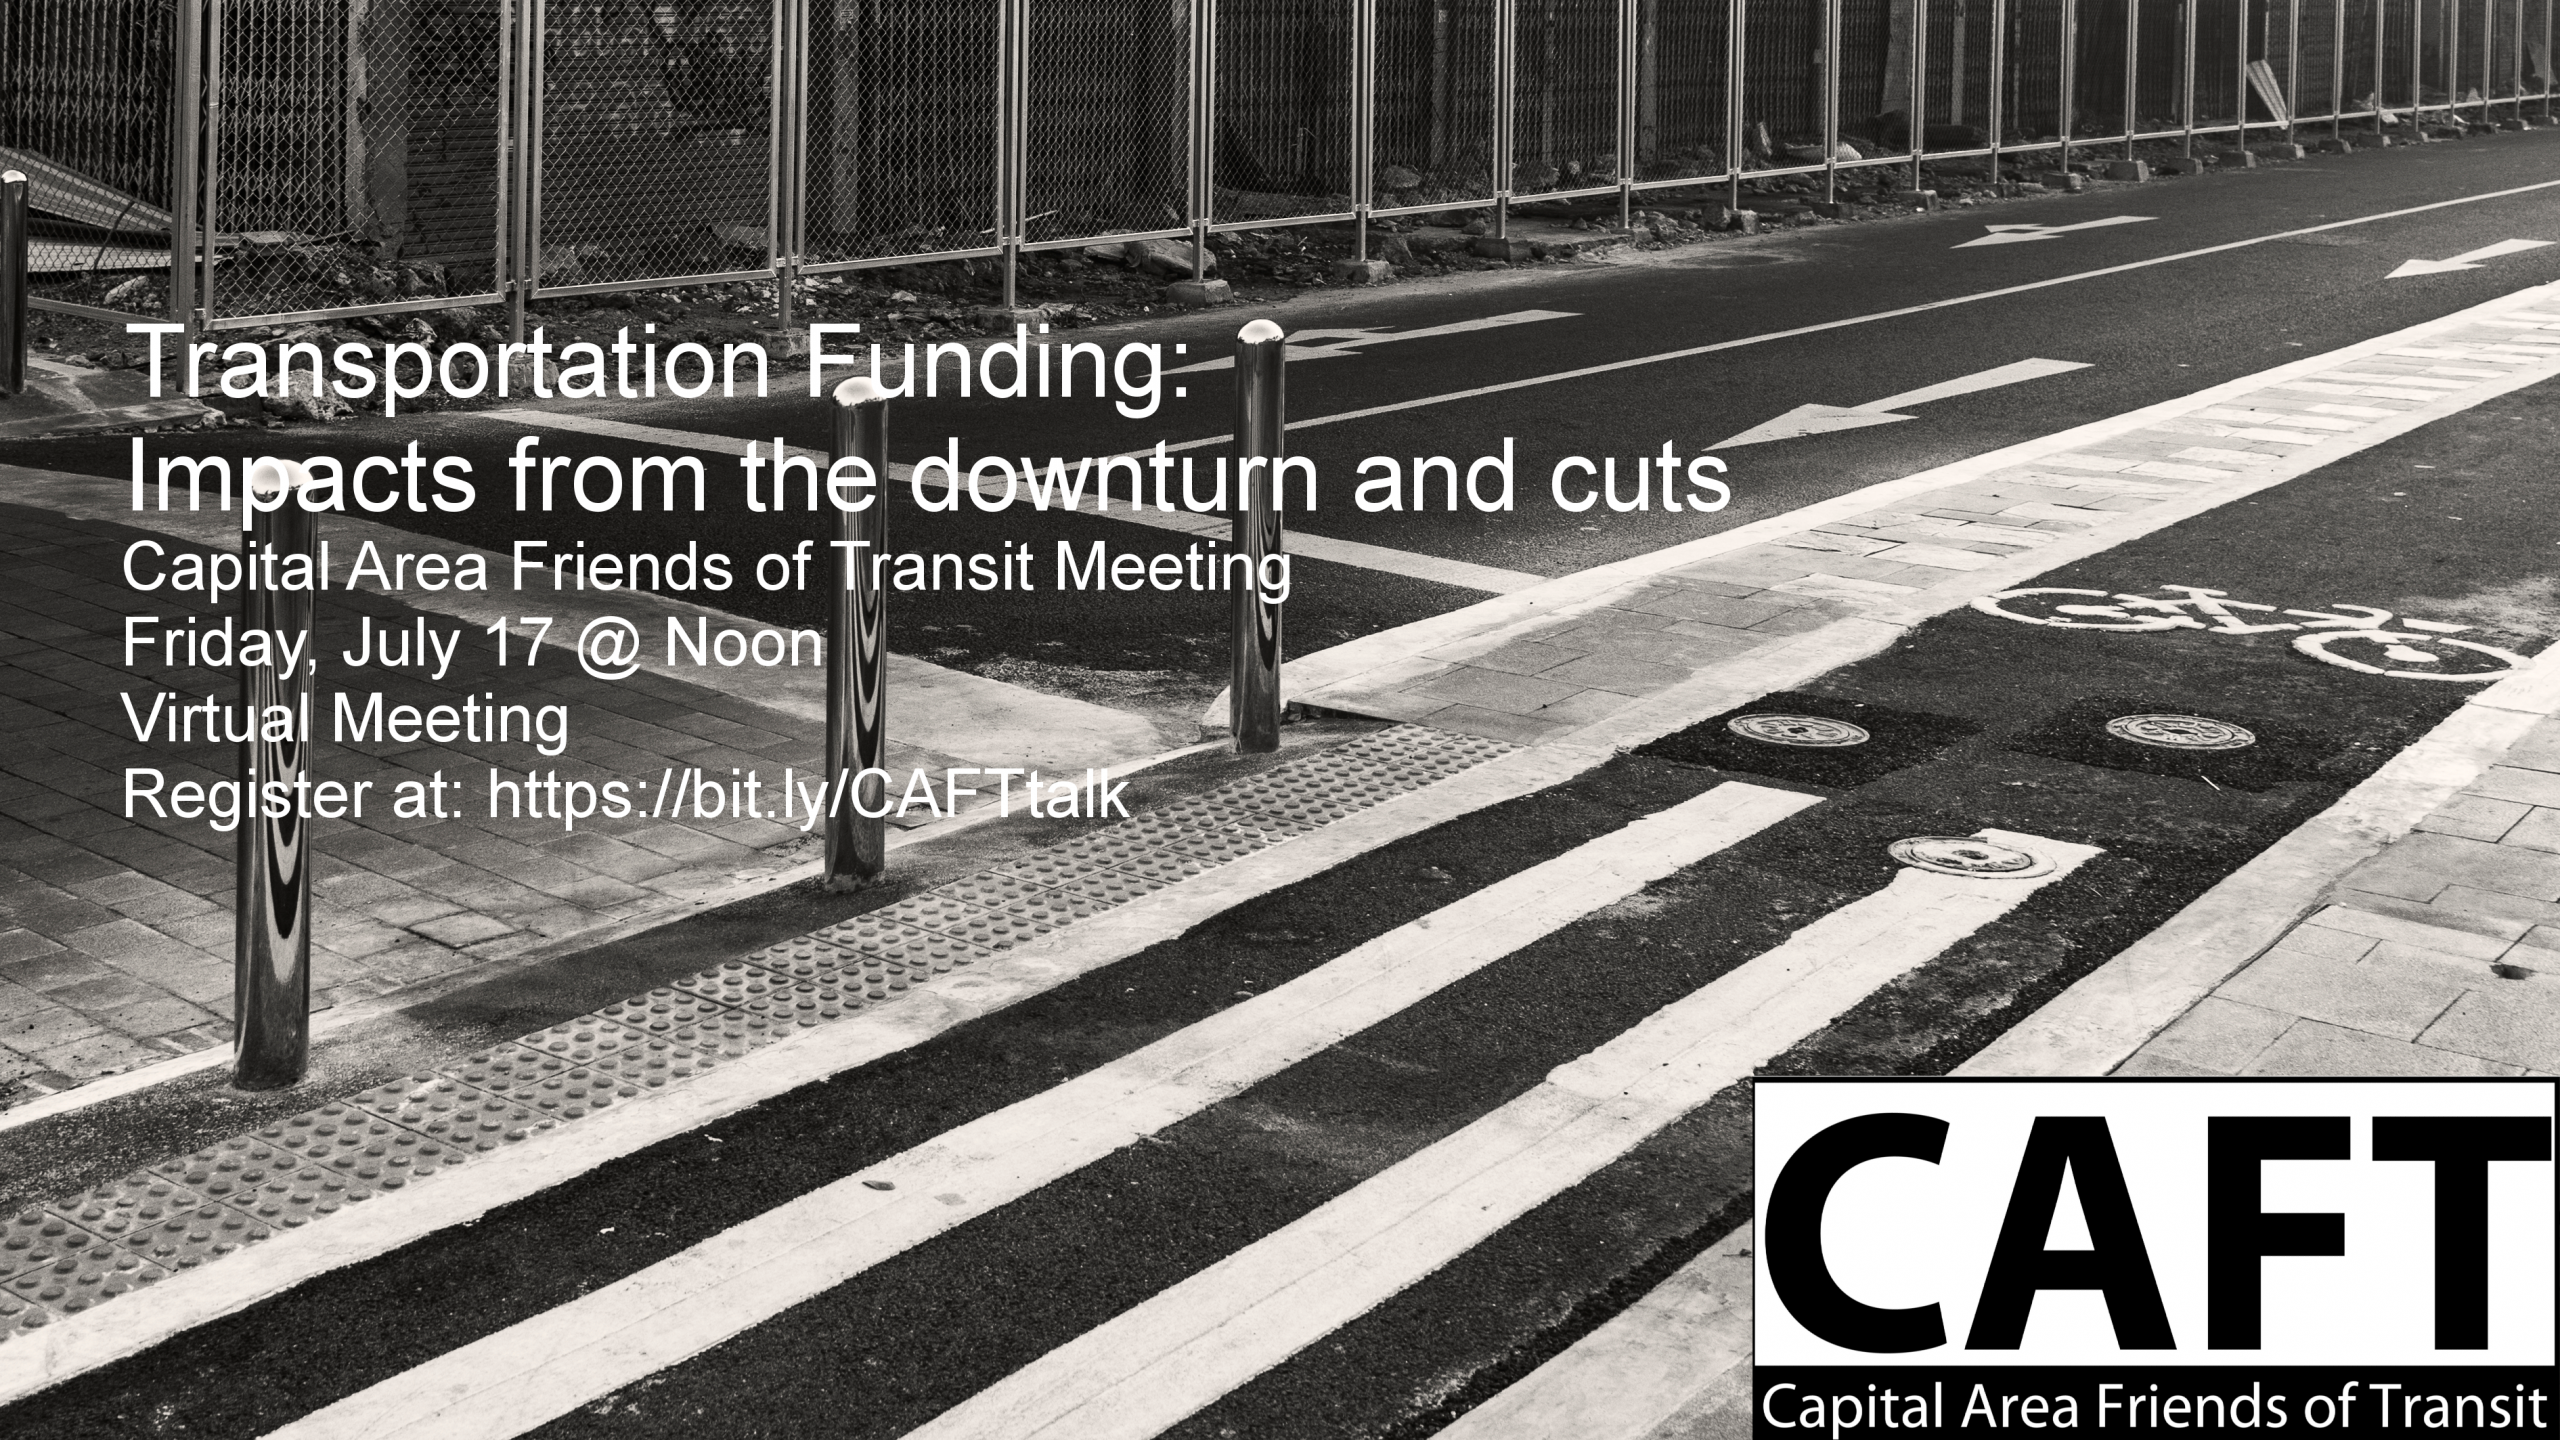 Transportation Funding: Impacts from the Downturn and Funding Cuts